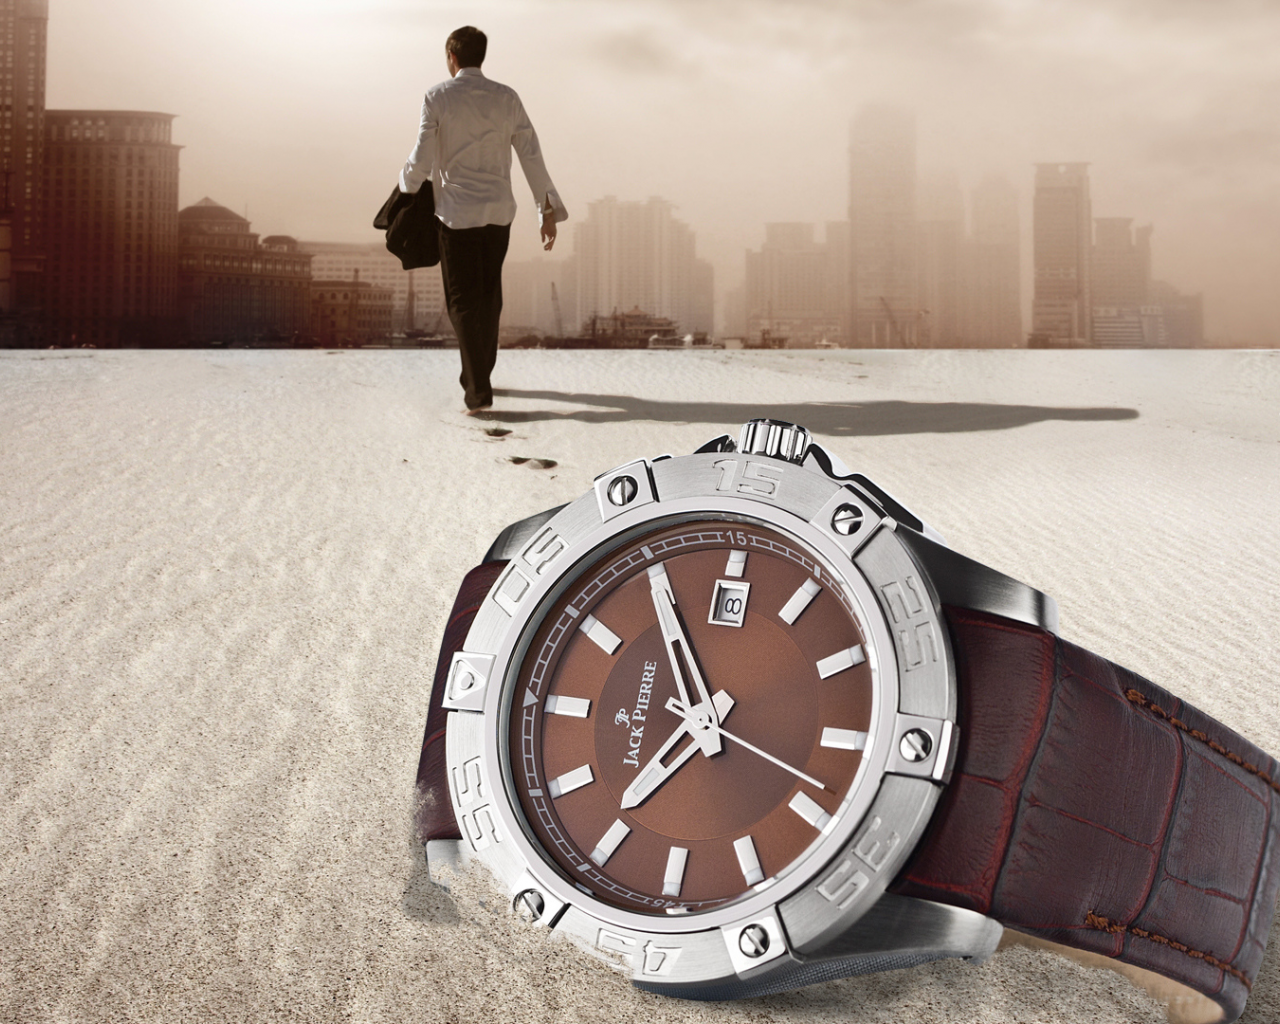 watch, person, sand, leather